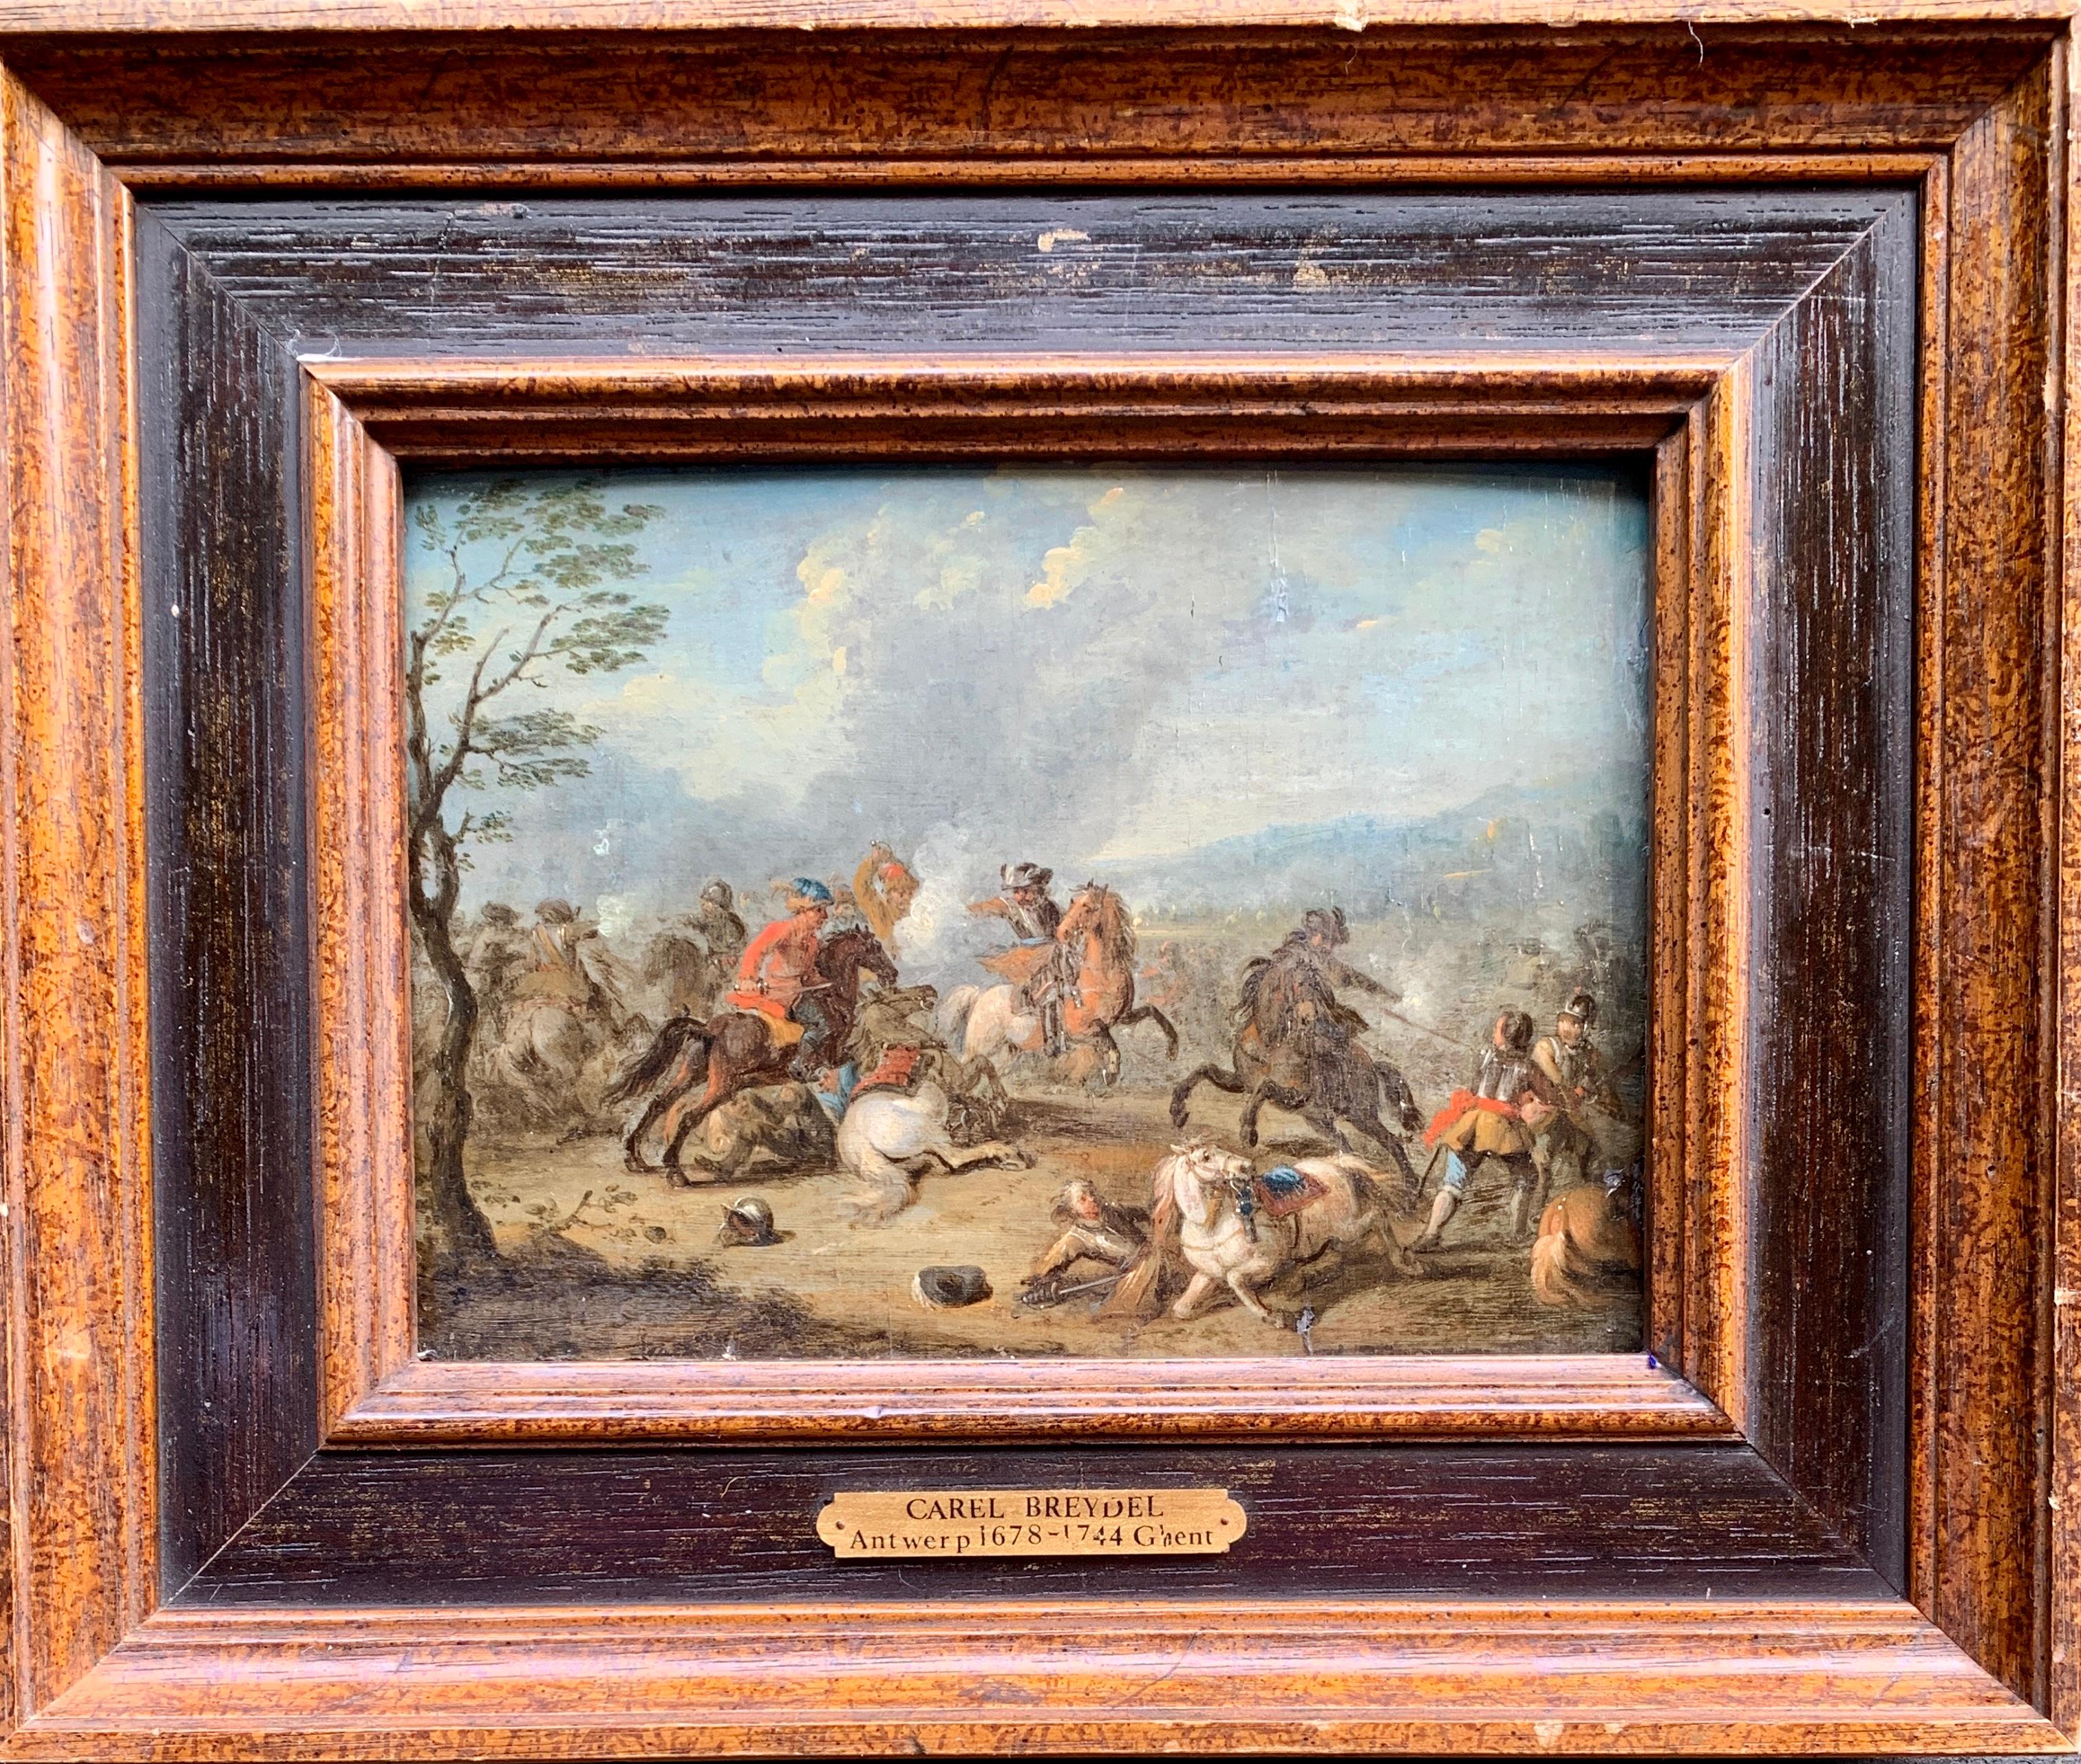 Antique 17th or 18th century Dutch Men on horses in Battle in a landscape